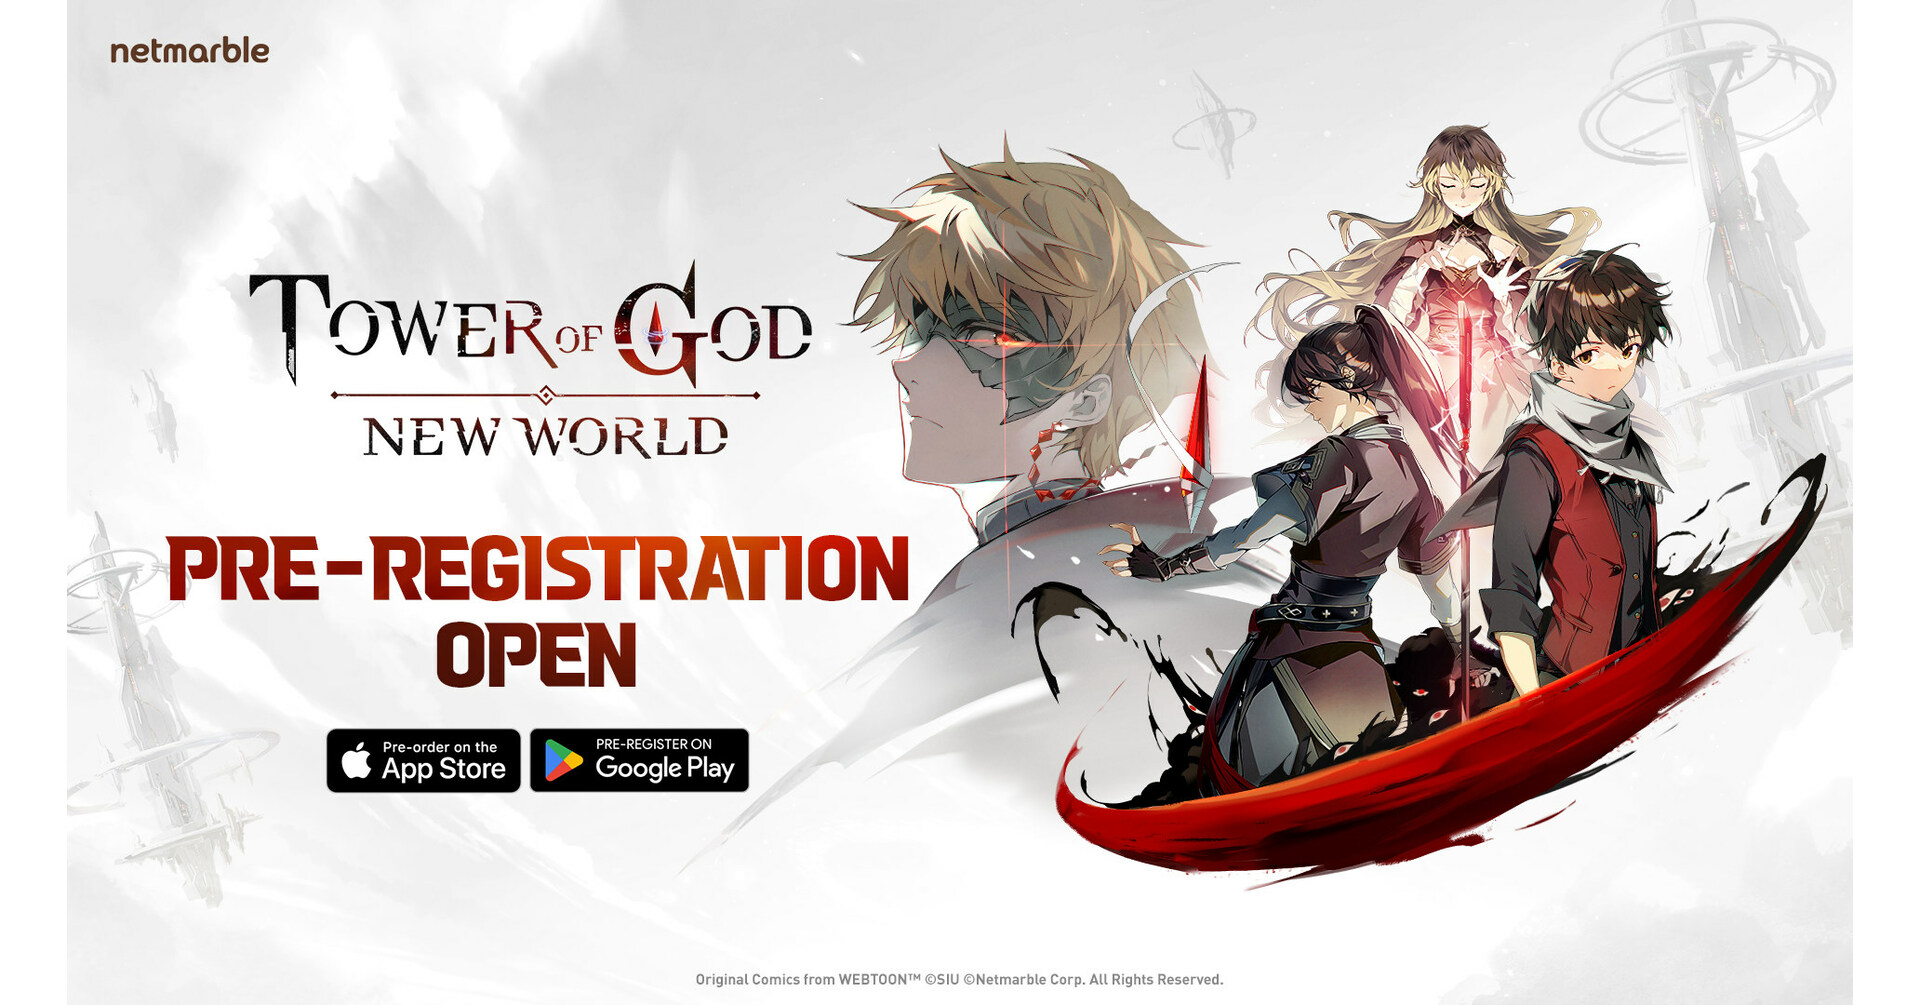 GLOBAL TOWER OF GOD NEW WORLD PRE-REGISTRATIONS & NEW GAMEPLAY!!! 